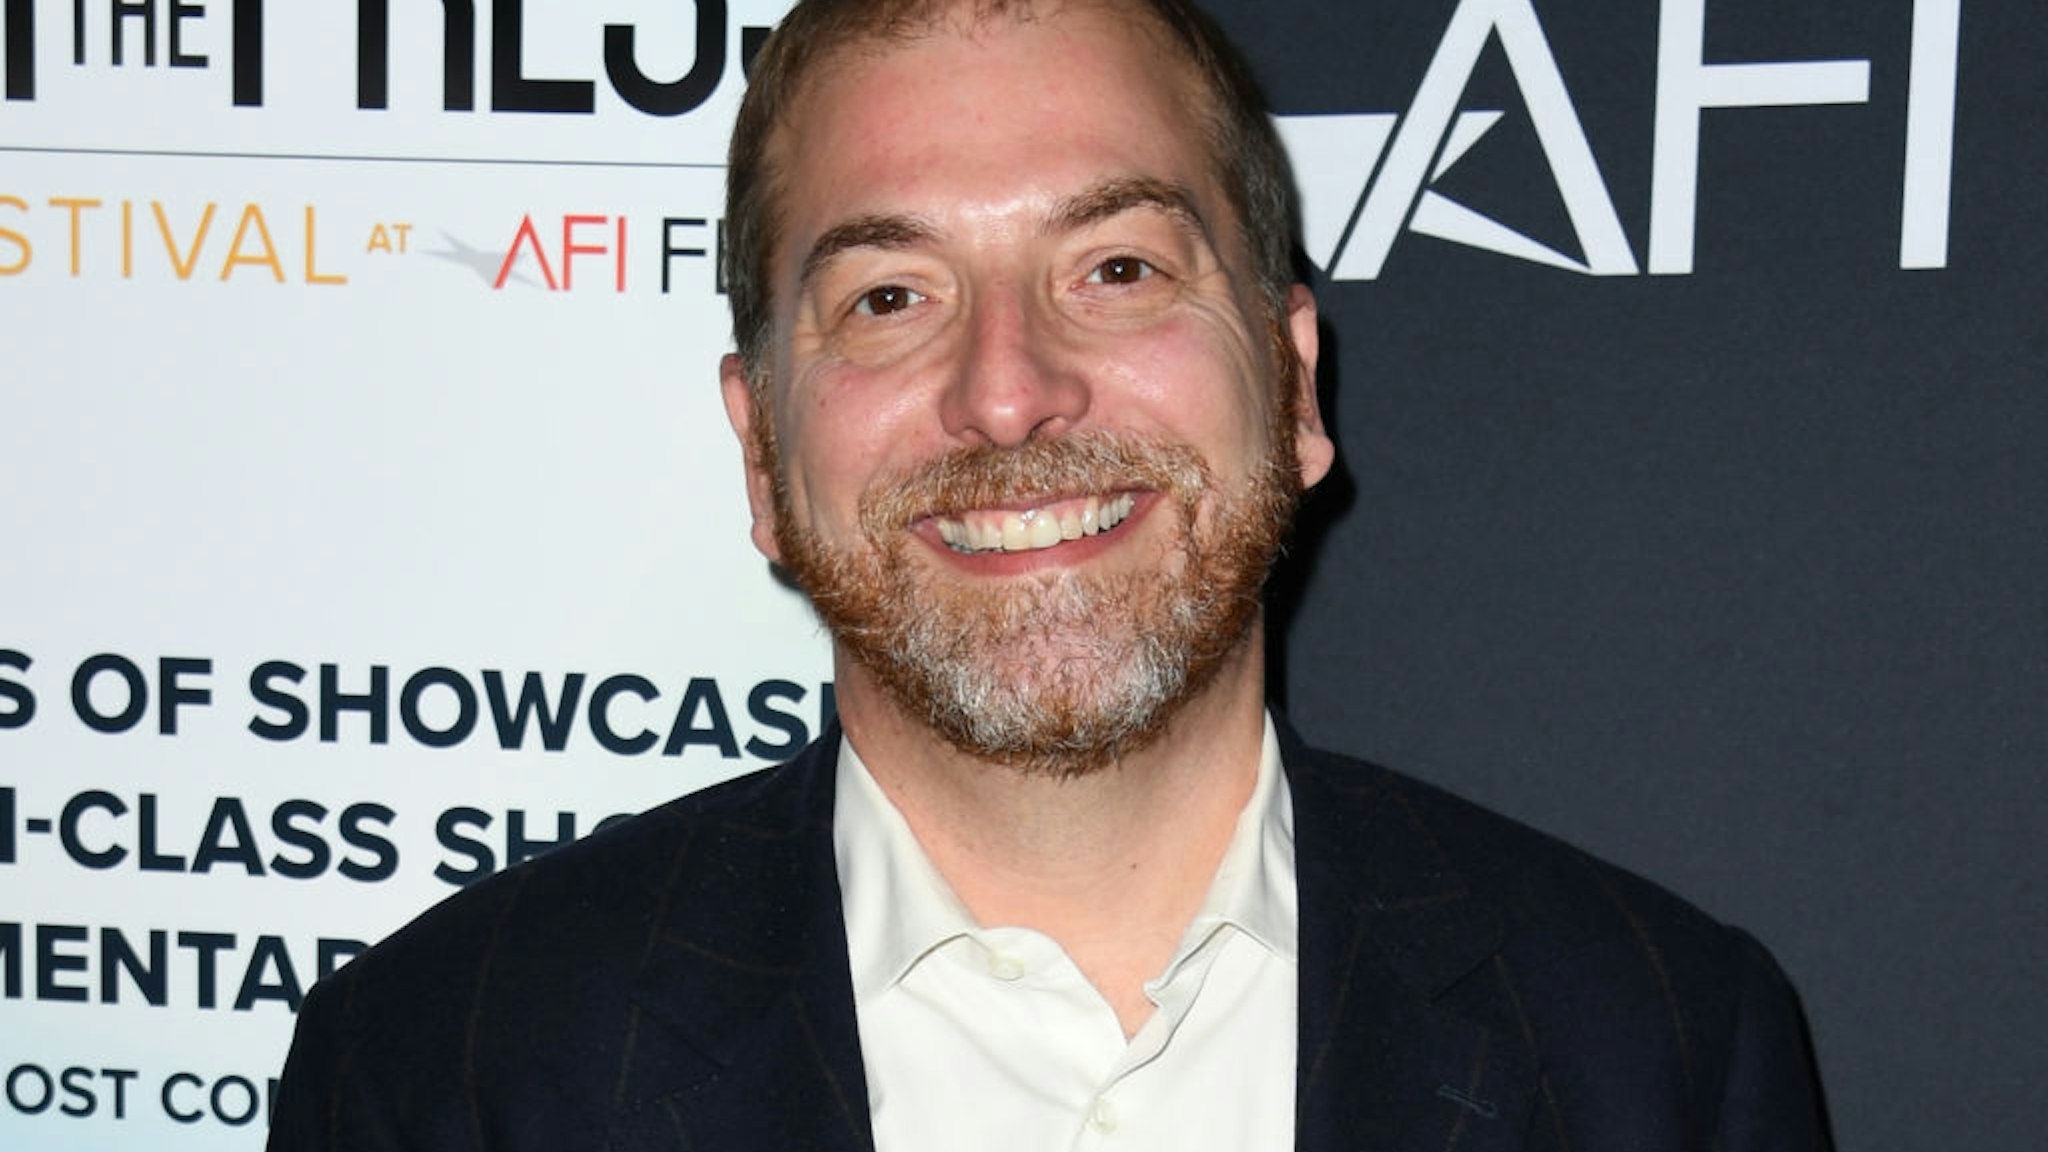 HOLLYWOOD, CALIFORNIA - NOVEMBER 11: Chuck Todd attends the 2021 AFI Fest - "Meet The Press" Photo Call at TCL Chinese 6 Theatres on November 11, 2021 in Hollywood, California. (Photo by Jon Kopaloff/Getty Images)